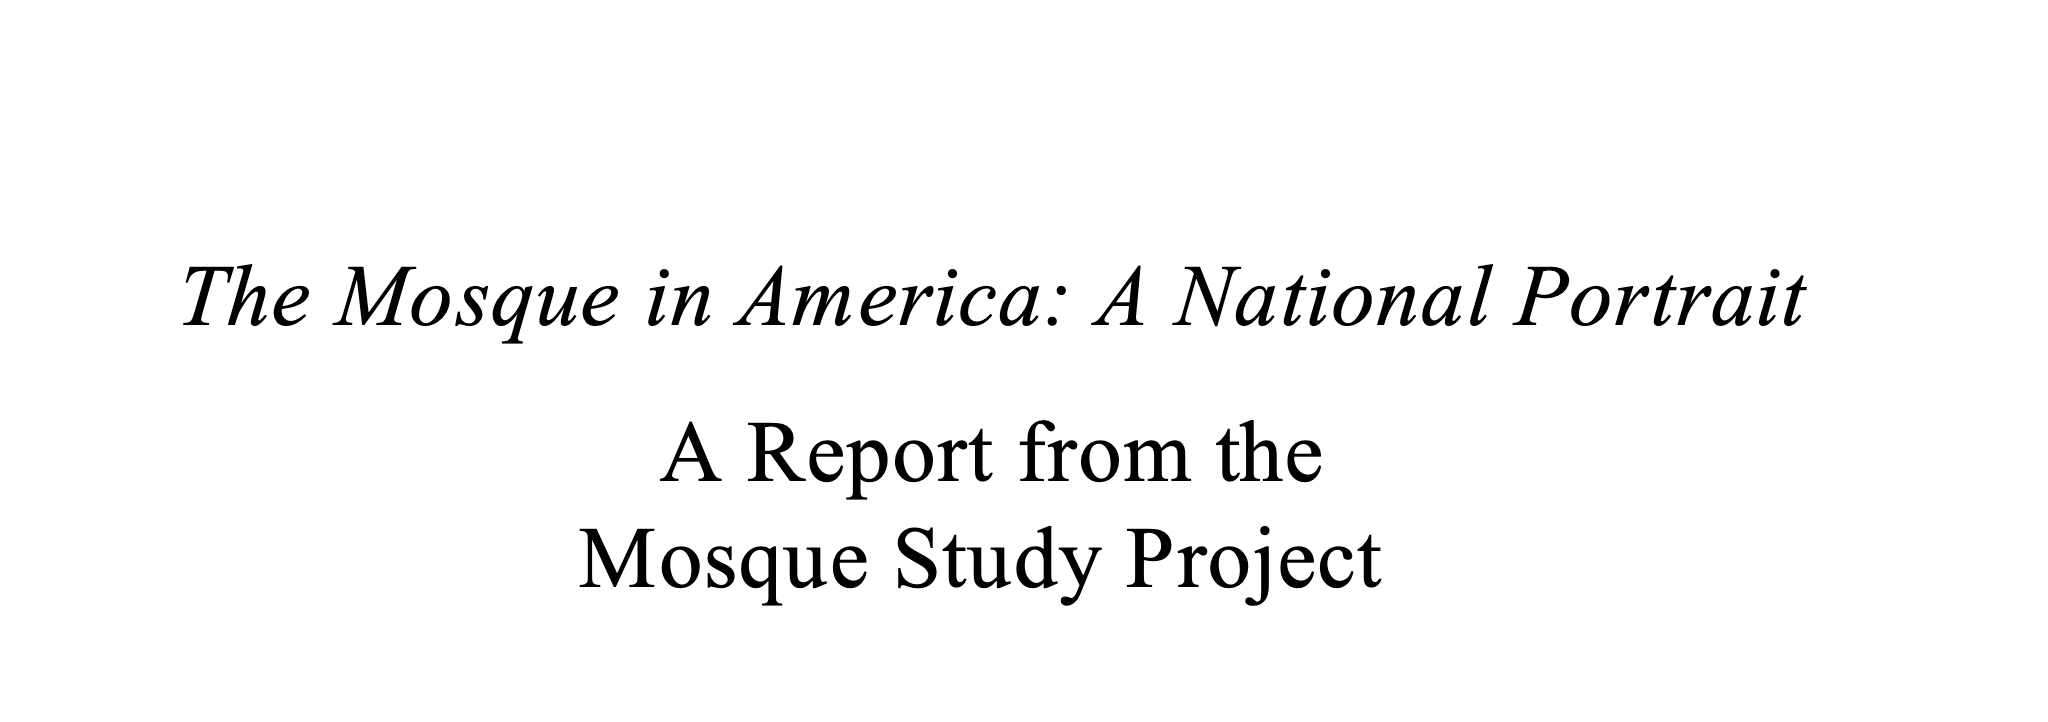 The Mosque in America: A National Portrait from the Mosque Study Project